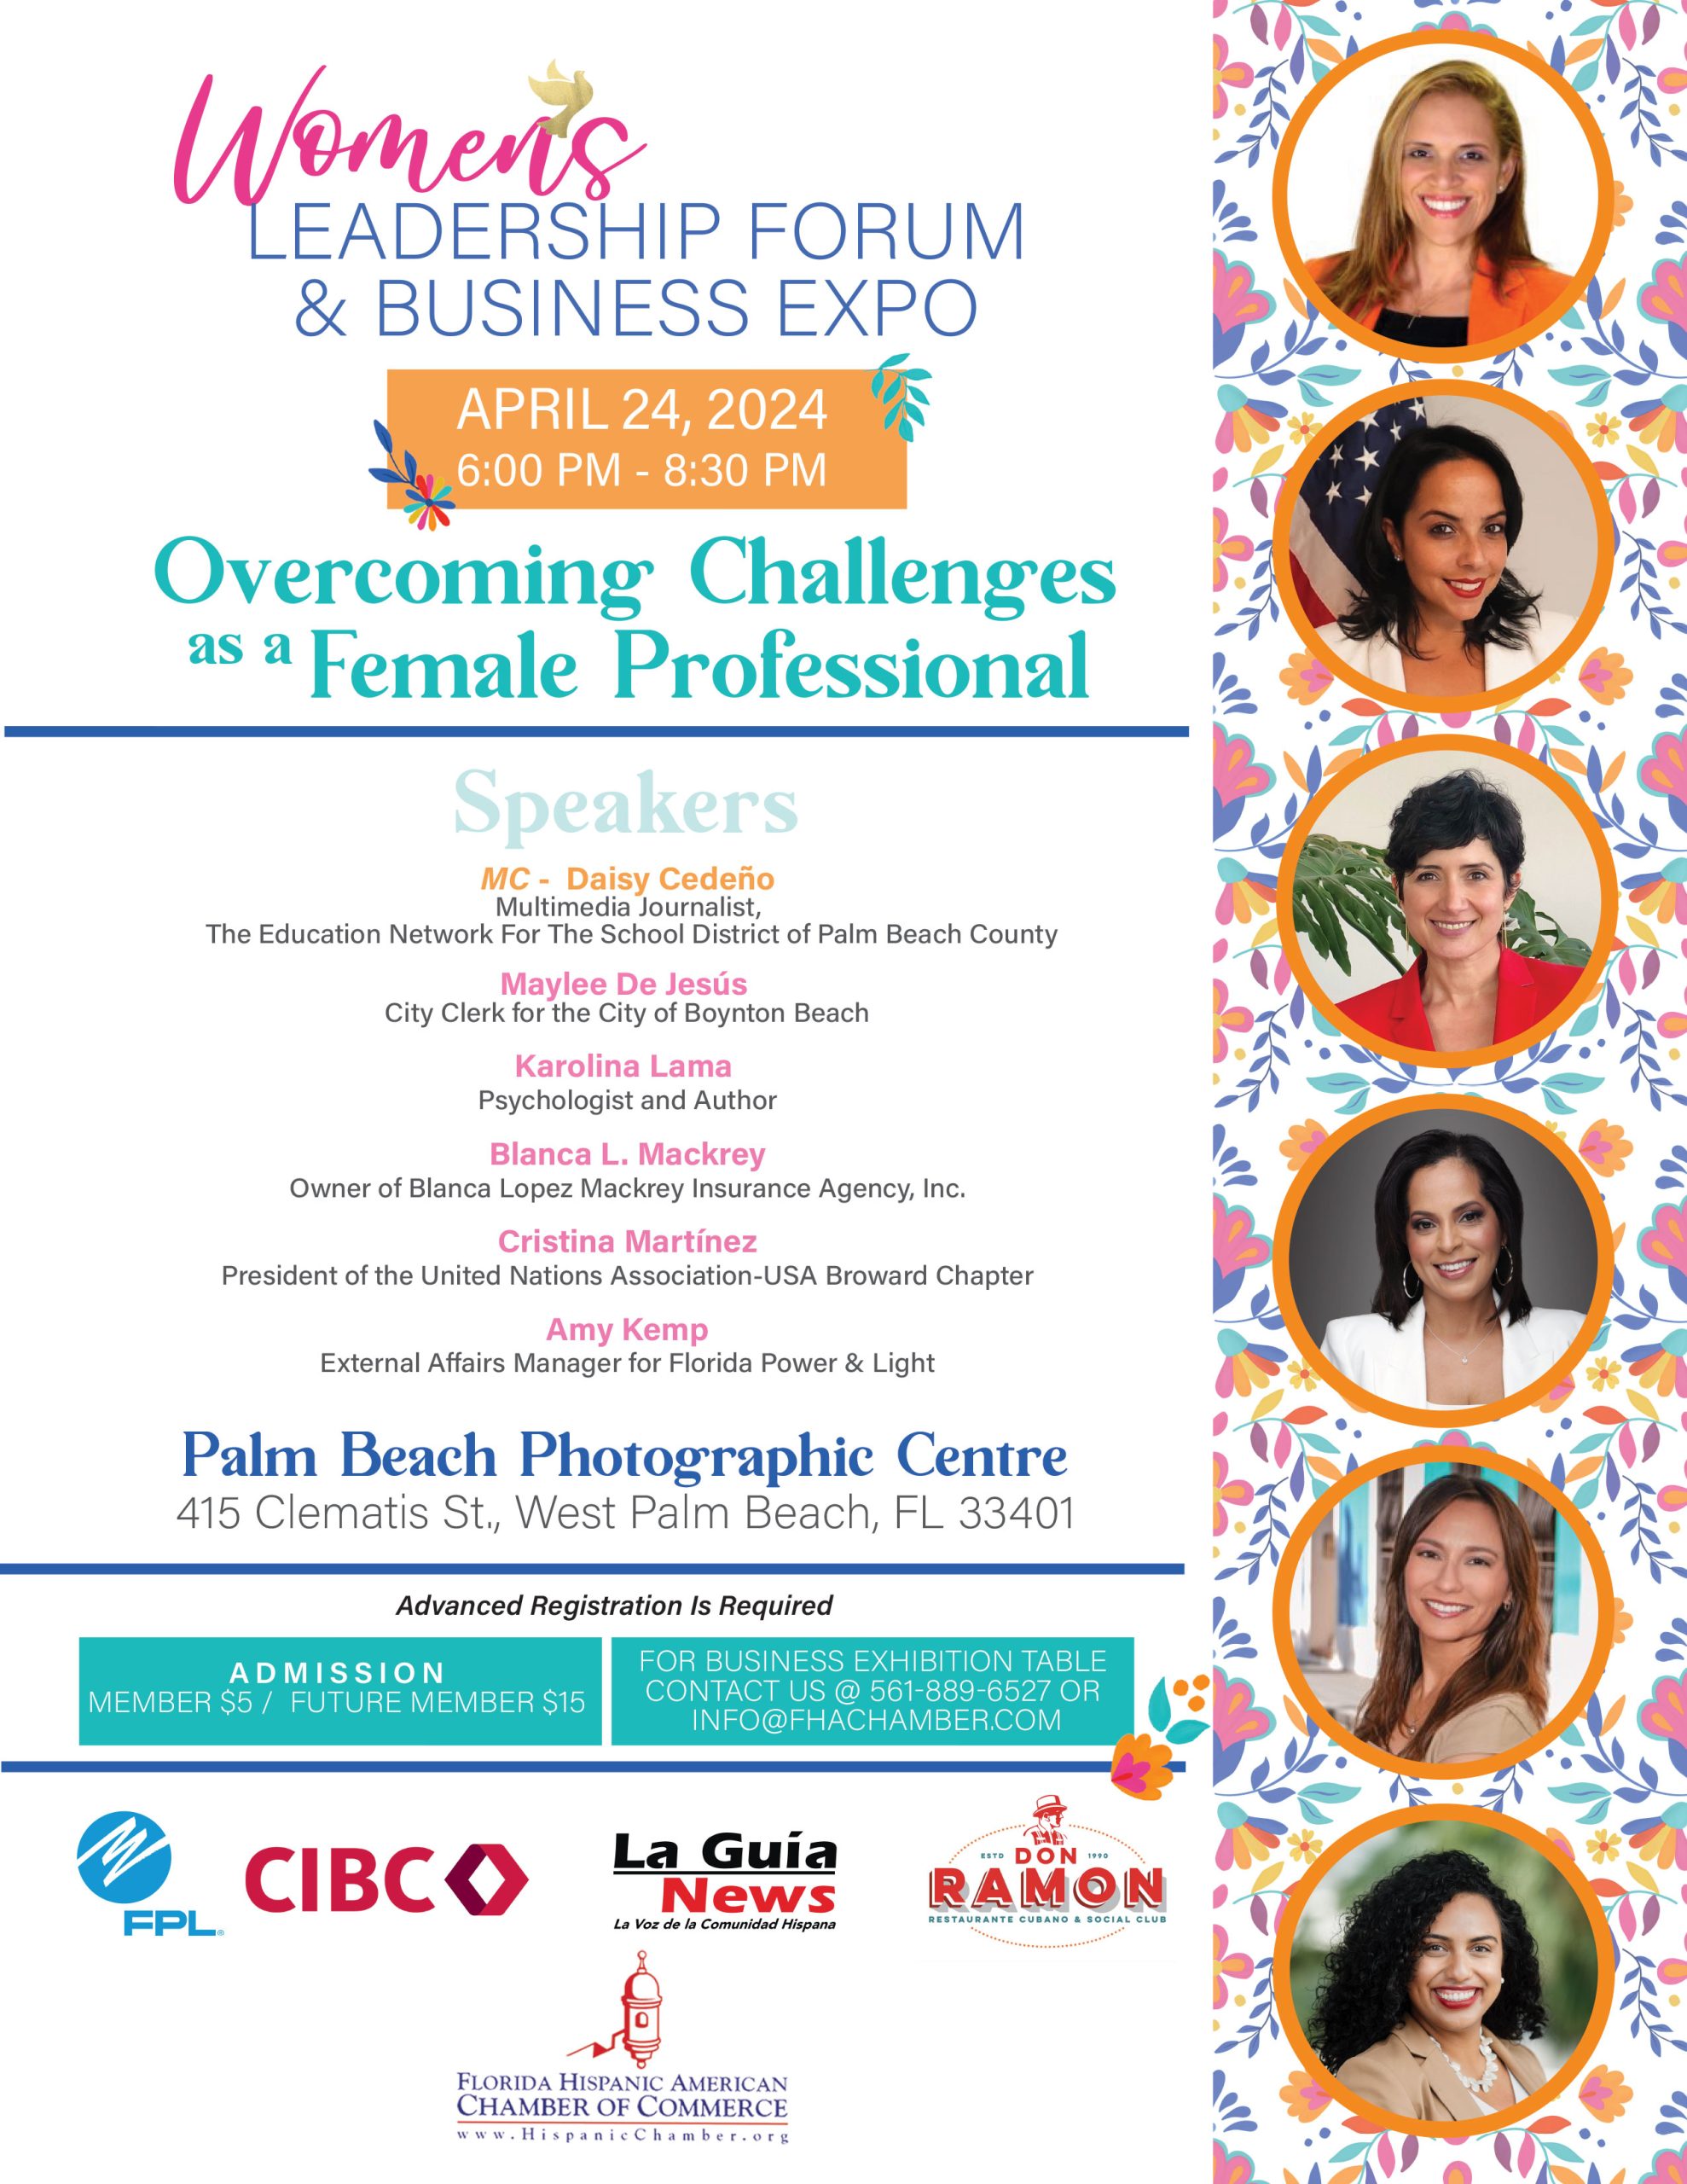 The Women’s Leadership Forum & Business Expo 2024 “Empowering All Women.” 